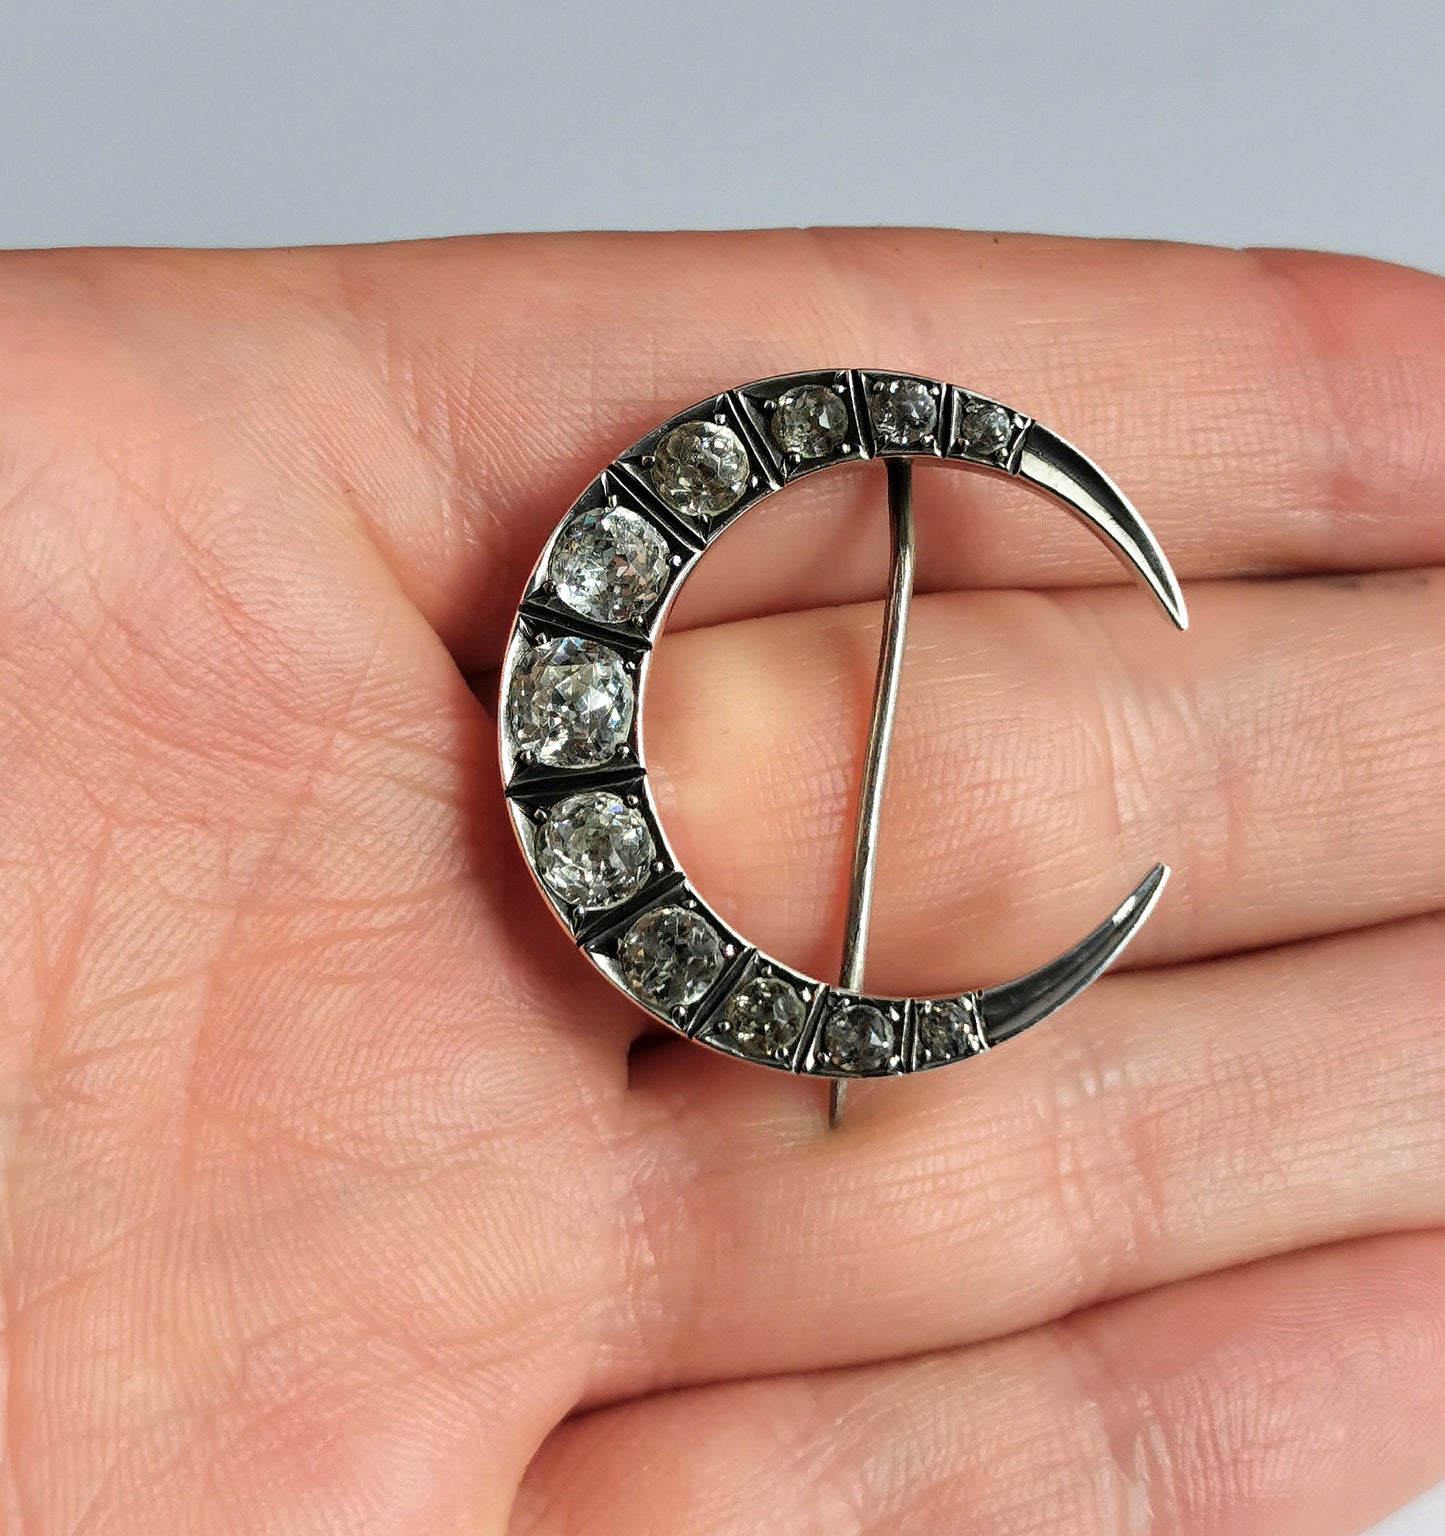 Antique Victorian paste crescent brooch, Moon, Sterling silver